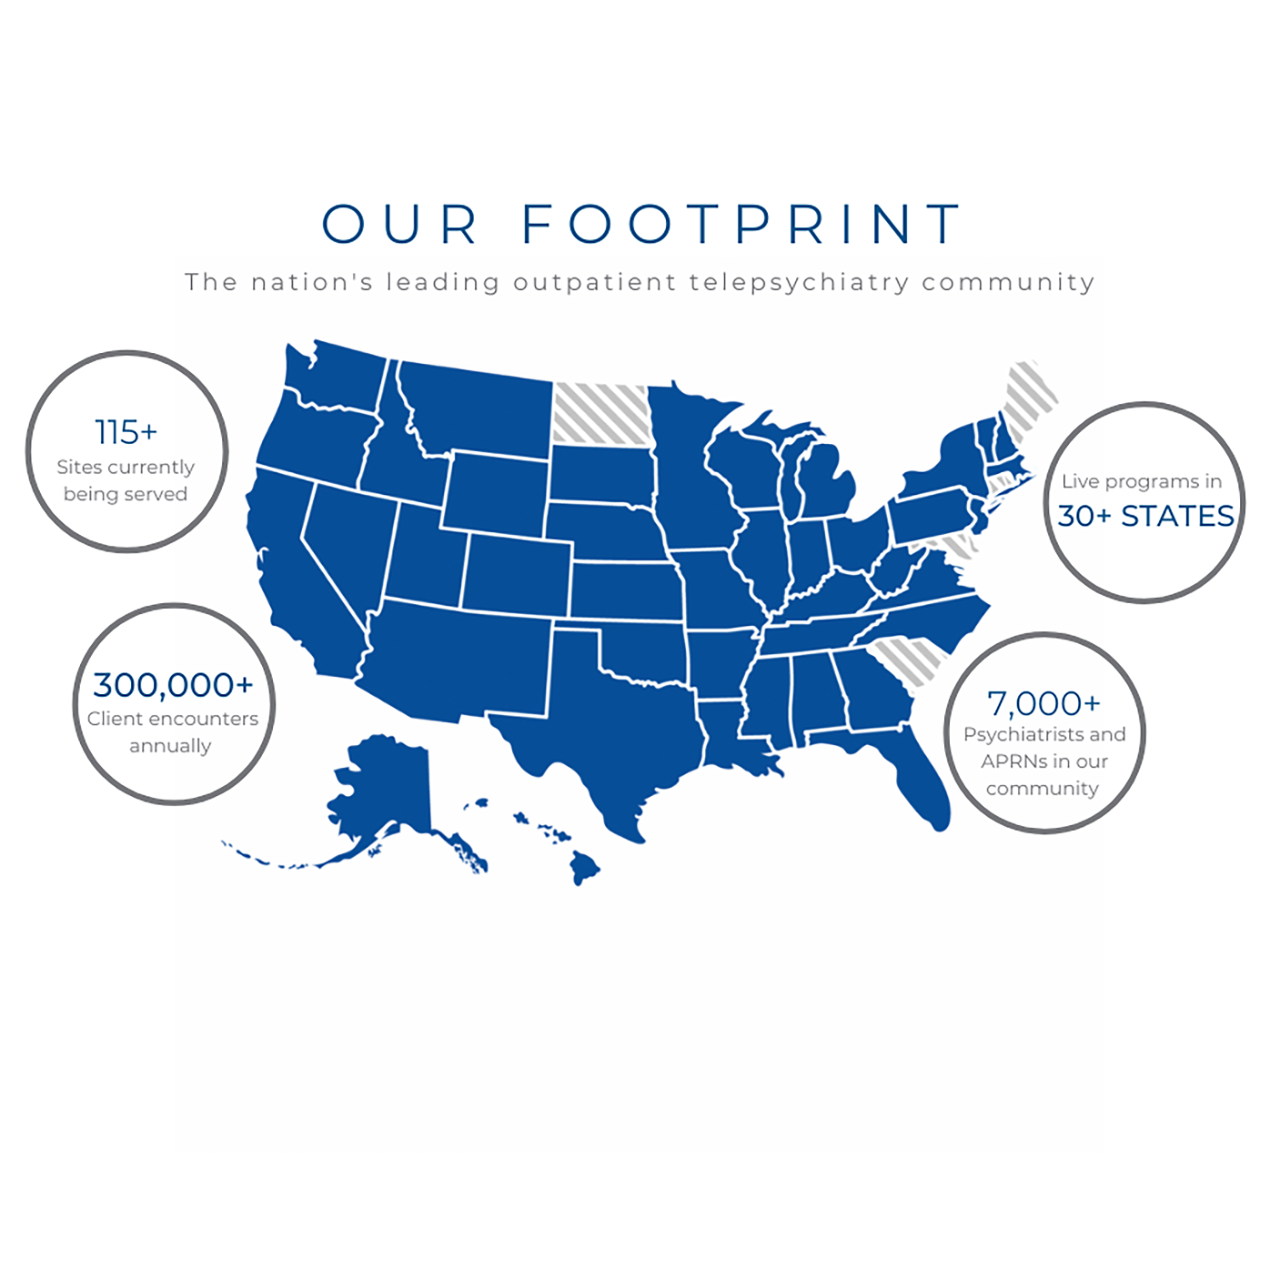 Our footprint. The nation's leading outpatient telepsychiatry community. 115+ sites currently being served. 300,000+ client encounters annually. 30+ states. 7,000+ psychiatrists and APRNs in our community.